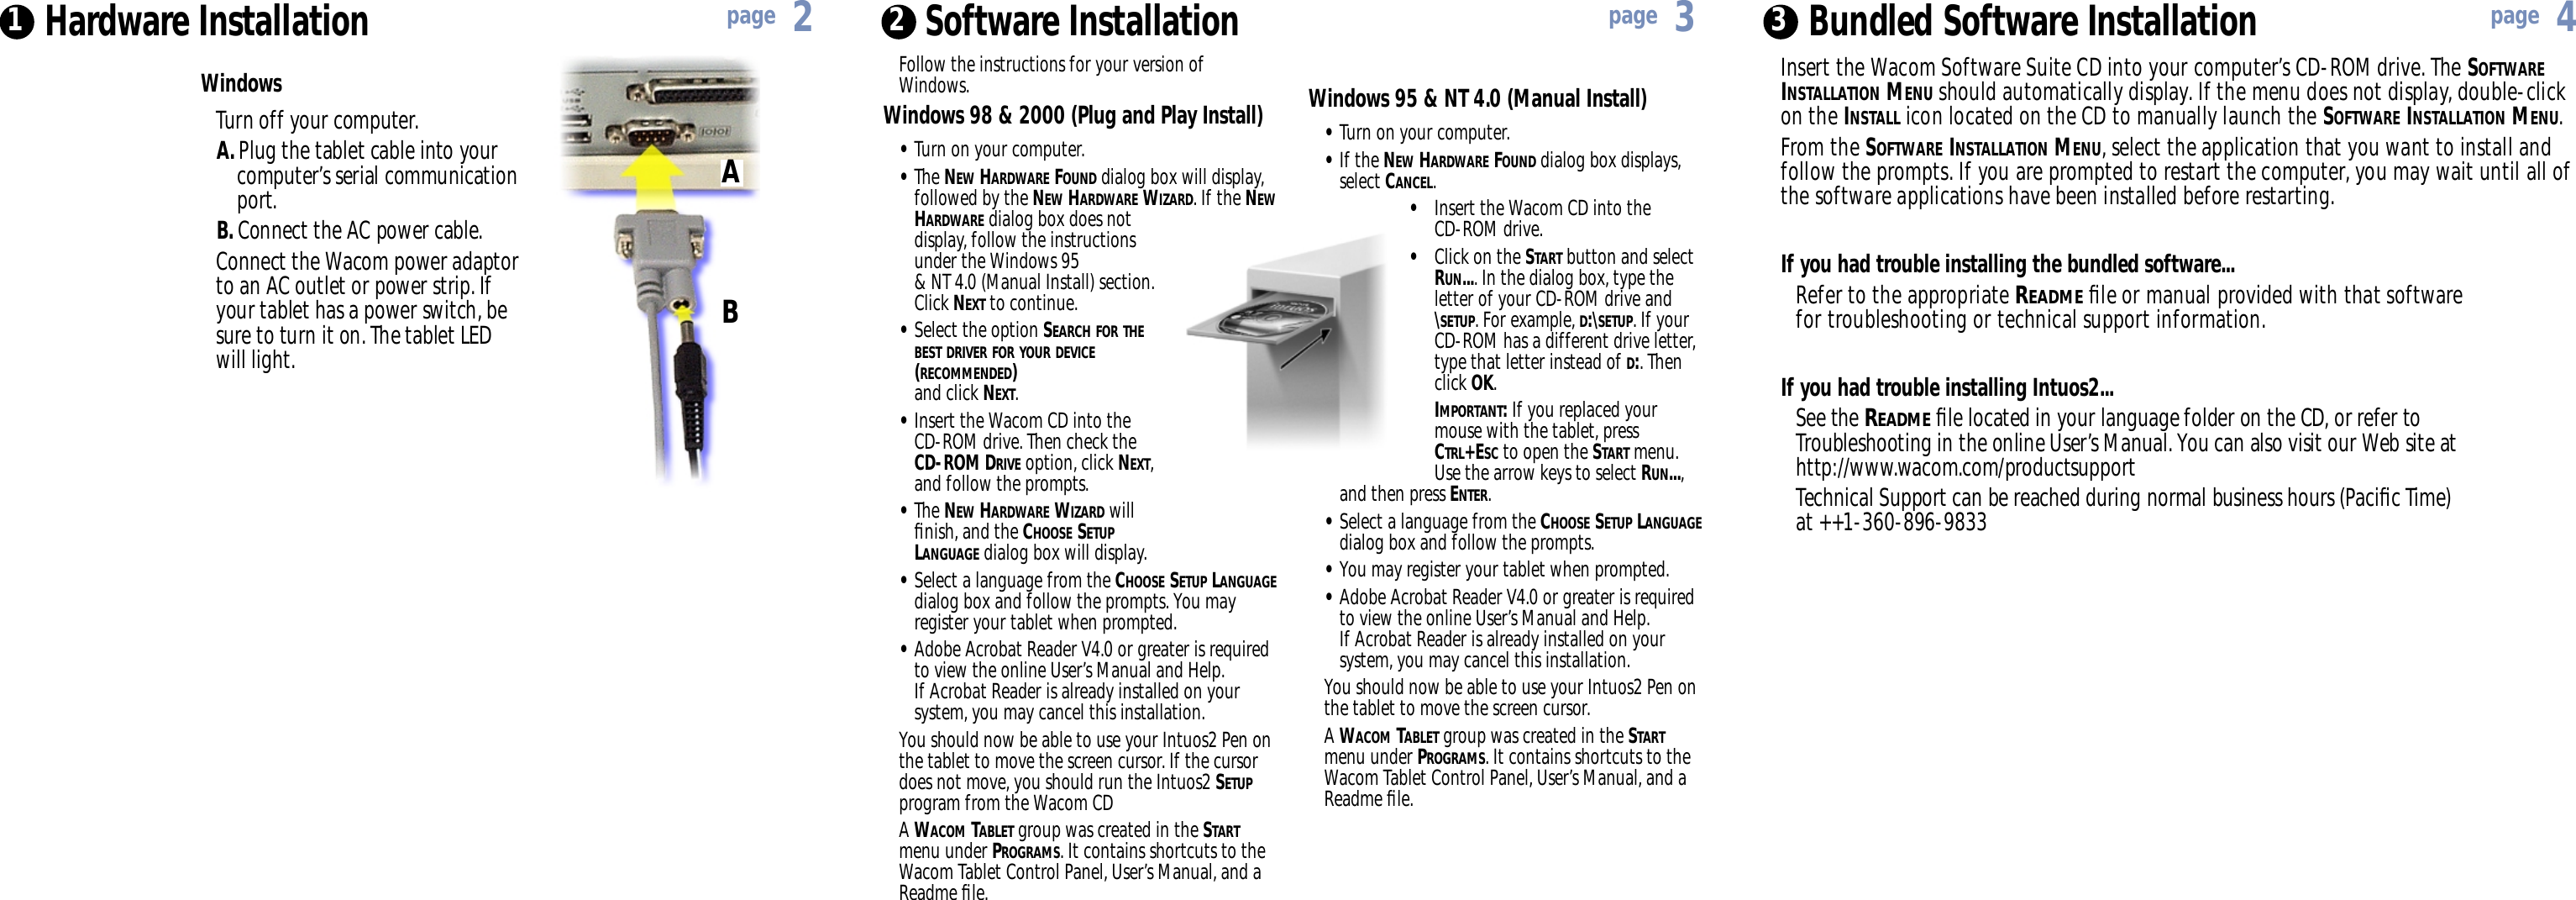 Windows 95 &amp; NT 4.0 (Manual Install)•Turn on your computer.•If the NEW HARDWARE FOUND dialog box displays, select CANCEL.•Insert the Wacom CD into the CD-ROM drive.•Click on the START button and select RUN.... In the dialog box, type the letter of your CD-ROM drive and \SETUP. For example, D:\SETUP. If your CD-ROM has a different drive letter, type that letter instead of D:. Then click OK.IMPORTANT:If you replaced your mouse with the tablet, press CTRL+ESC to open the START menu. Use the arrow keys to select RUN..., and then press ENTER.•Select a language from the CHOOSE SETUP LANGUAGEdialog box and follow the prompts.•You may register your tablet when prompted.•Adobe Acrobat Reader V4.0 or greater is required to view the online User’s Manual and Help. If Acrobat Reader is already installed on your system, you may cancel this installation.You should now be able to use your Intuos2 Pen onthe tablet to move the screen cursor.A WACOM TABLET group was created in the STARTmenu under PROGRAMS. It contains shortcuts to theWacom Tablet Control Panel, User’s Manual, and aReadme ﬁle.Follow the instructions for your version ofWindows.Windows 98 &amp; 2000 (Plug and Play Install)•Turn on your computer.•The NEW HARDWARE FOUND dialog box will display, followed by the NEW HARDWARE WIZARD. If the NEWHARDWARE dialog box does not display, follow the instructions under the Windows 95 &amp; NT 4.0 (Manual Install) section. Click NEXT to continue.•Select the option SEARCH FOR THEBEST DRIVER FOR YOUR DEVICE(RECOMMENDED)and click NEXT.•Insert the Wacom CD into the CD-ROM drive. Then check the CD-ROM DRIVE option, click NEXT, and follow the prompts.•The NEW HARDWARE WIZARD will ﬁnish, and the CHOOSE SETUPLANGUAGE dialog box will display.•Select a language from the CHOOSE SETUP LANGUAGEdialog box and follow the prompts. You may register your tablet when prompted.•Adobe Acrobat Reader V4.0 or greater is required to view the online User’s Manual and Help. If Acrobat Reader is already installed on your system, you may cancel this installation.You should now be able to use your Intuos2 Pen onthe tablet to move the screen cursor. If the cursordoes not move, you should run the Intuos2 SETUPprogram from the Wacom CDA WACOM TABLET group was created in the STARTmenu under PROGRAMS. It contains shortcuts to theWacom Tablet Control Panel, User’s Manual, and aReadme ﬁle.Hardware Installation1 2Software Installation Insert the Wacom Software Suite CD into your computer’s CD-ROM drive. The SOFTWAREINSTALLATION MENU should automatically display. If the menu does not display, double-clickon the INSTALL icon located on the CD to manually launch the SOFTWARE INSTALLATION MENU.From the SOFTWARE INSTALLATION MENU, select the application that you want to install andfollow the prompts. If you are prompted to restart the computer, you may wait until all ofthe software applications have been installed before restarting.If you had trouble installing the bundled software...Refer to the appropriate READMEﬁle or manual provided with that software for troubleshooting or technical support information.If you had trouble installing Intuos2...See the READMEﬁle located in your language folder on the CD, or refer to Troubleshooting in the online User’s Manual. You can also visit our Web site at http://www.wacom.com/productsupportTechnical Support can be reached during normal business hours (Paciﬁc Time) at ++1-360-896-9833Bundled Software Installation3page 2page 3page 4WindowsTurn off your computer.A. Plug the tablet cable into your computer’s serial communication port.B. Connect the AC power cable.Connect the Wacom power adaptorto an AC outlet or power strip. Ifyour tablet has a power switch, besure to turn it on. The tablet LEDwill light.AB